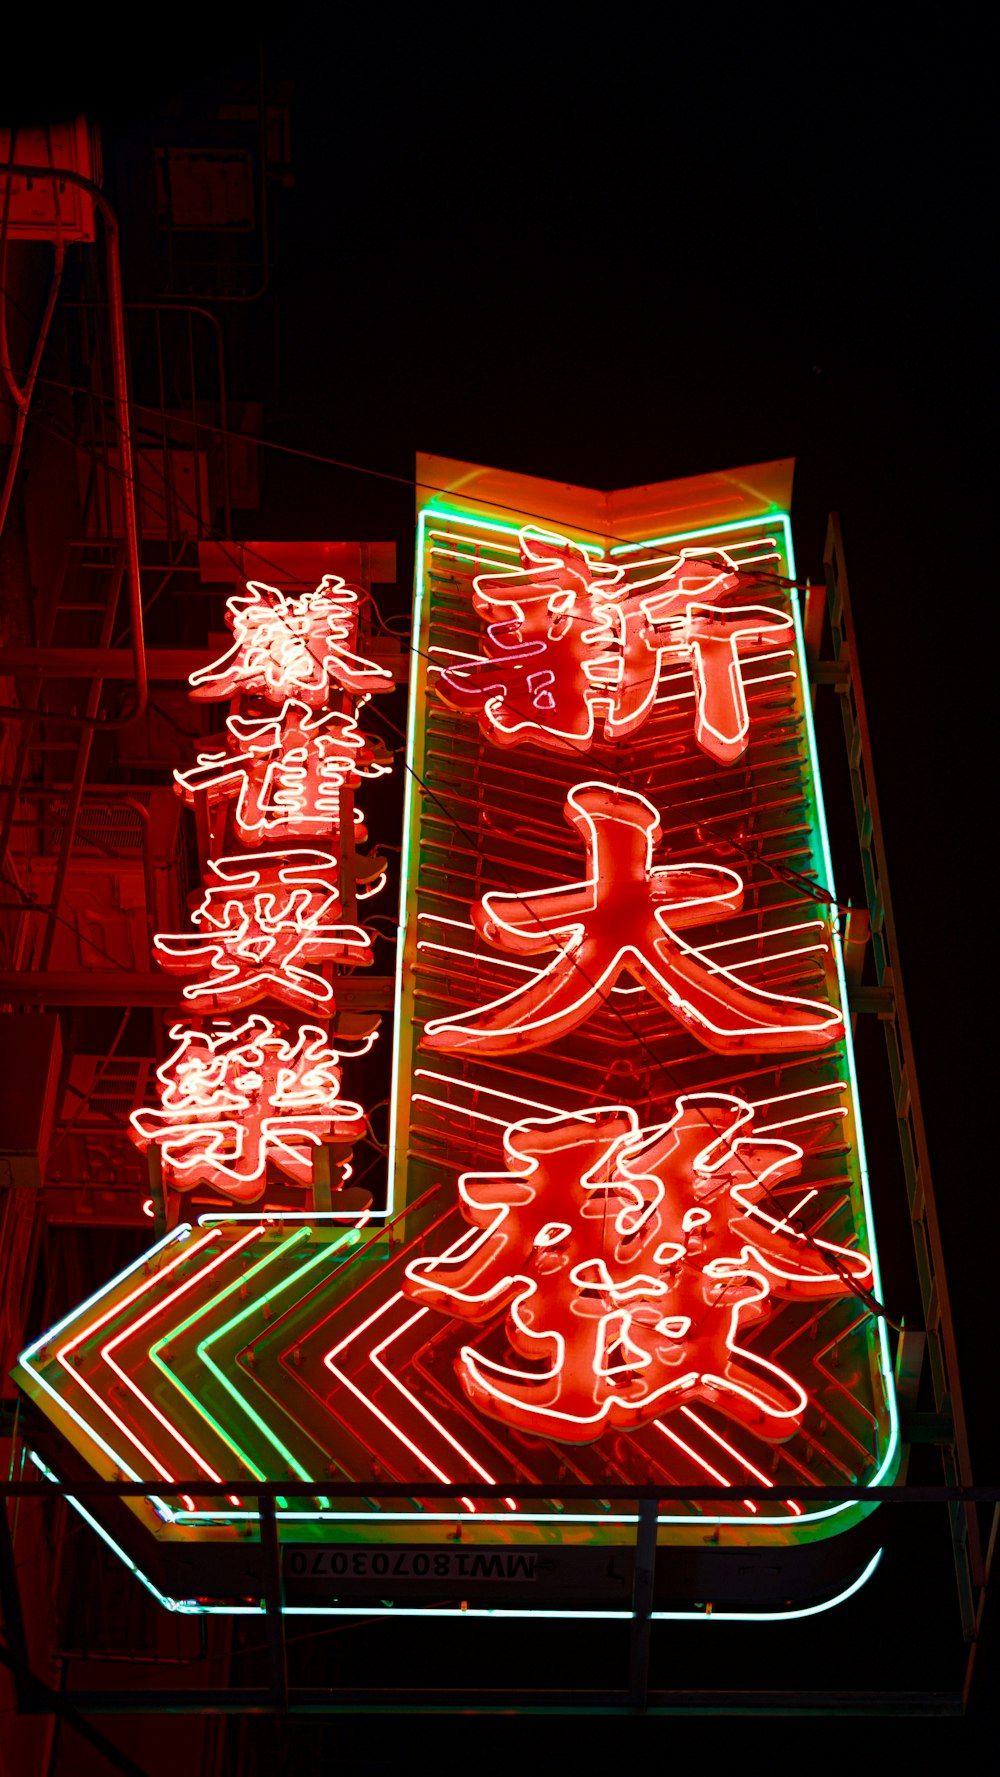 a large neon sign with asian writing on it